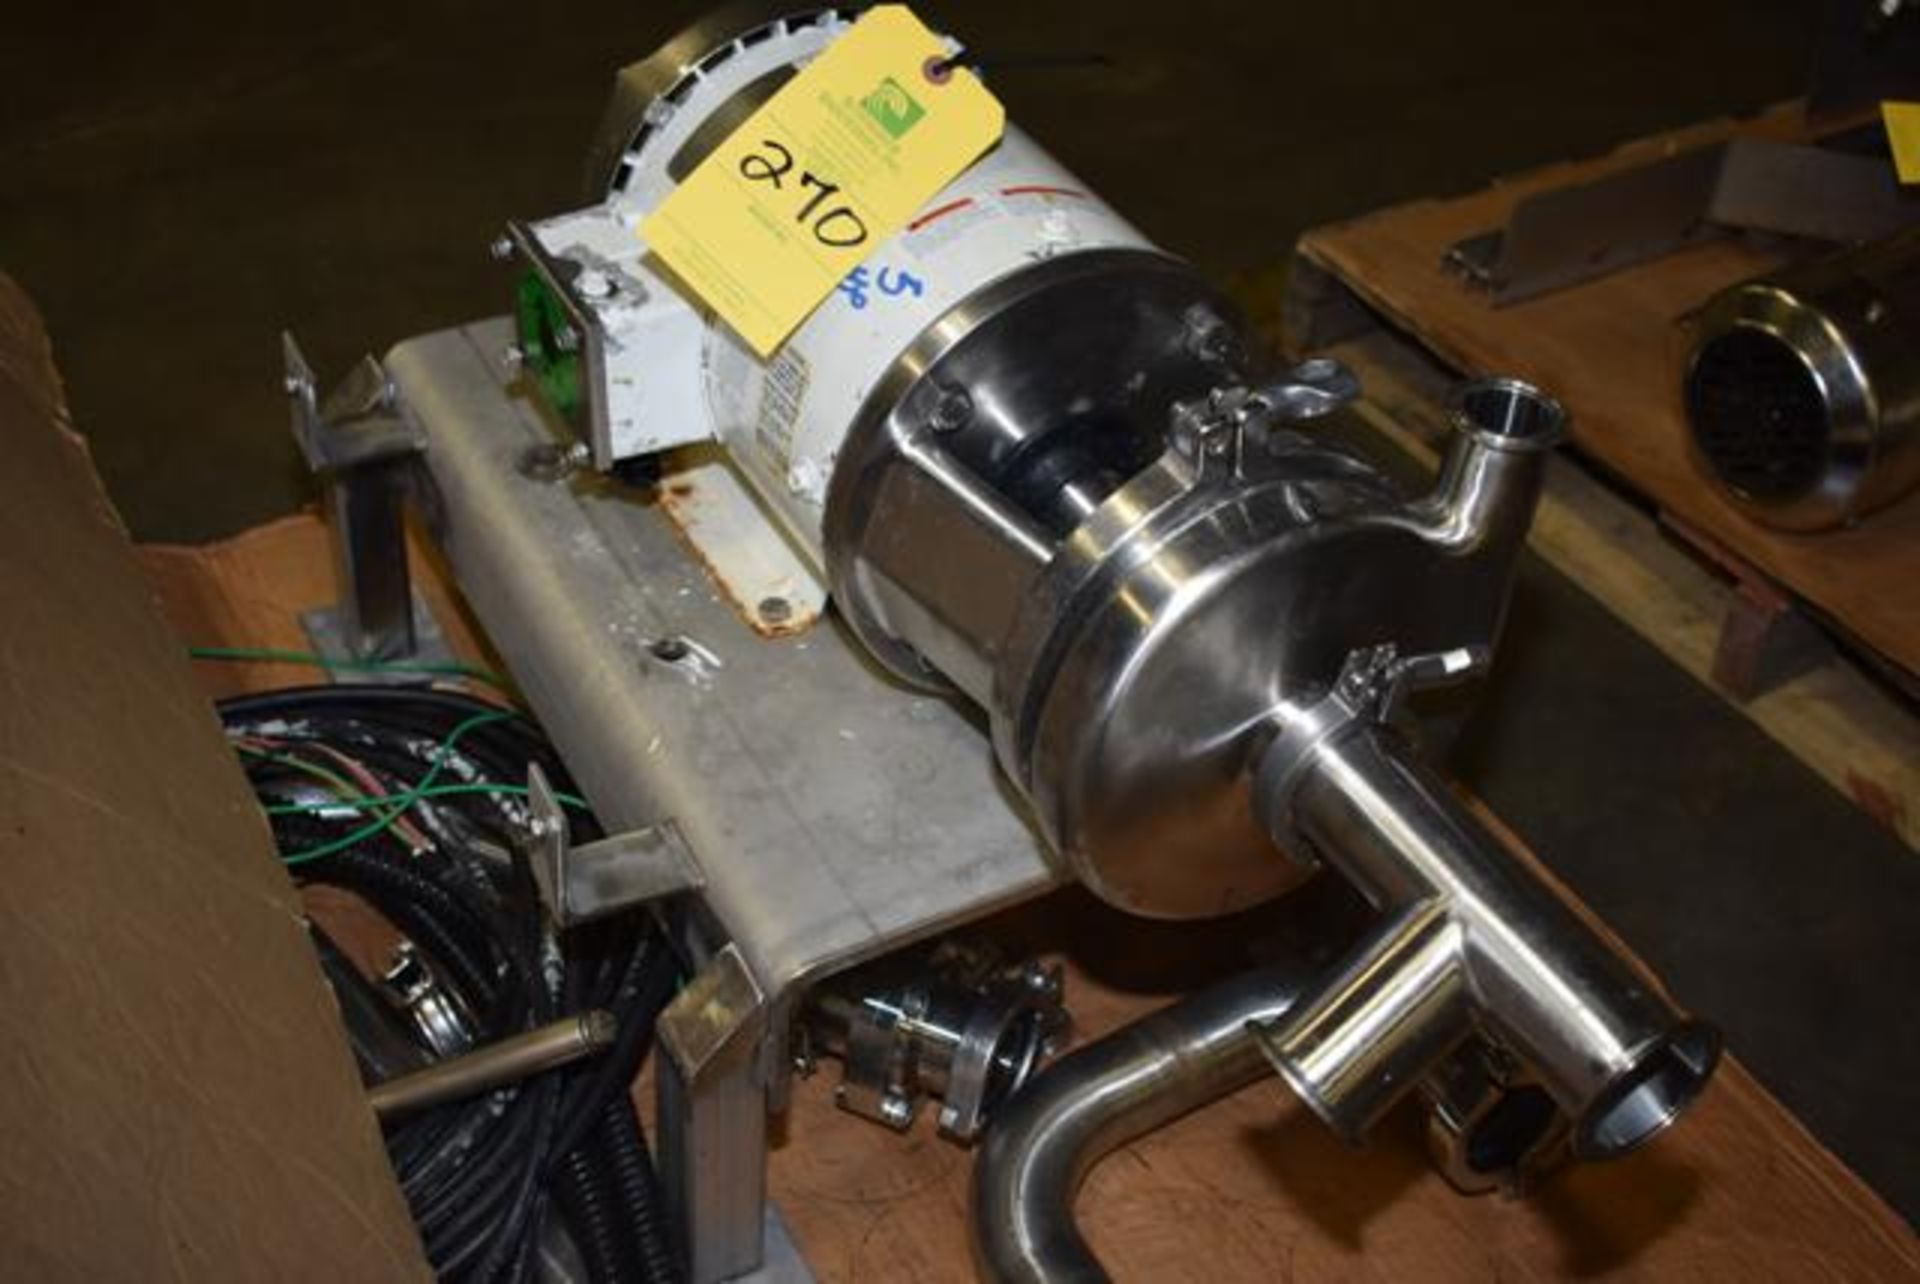 Tri-Clover Model C216 Pump with 3 HP Motor, Loading Fee: $50 - Image 2 of 2